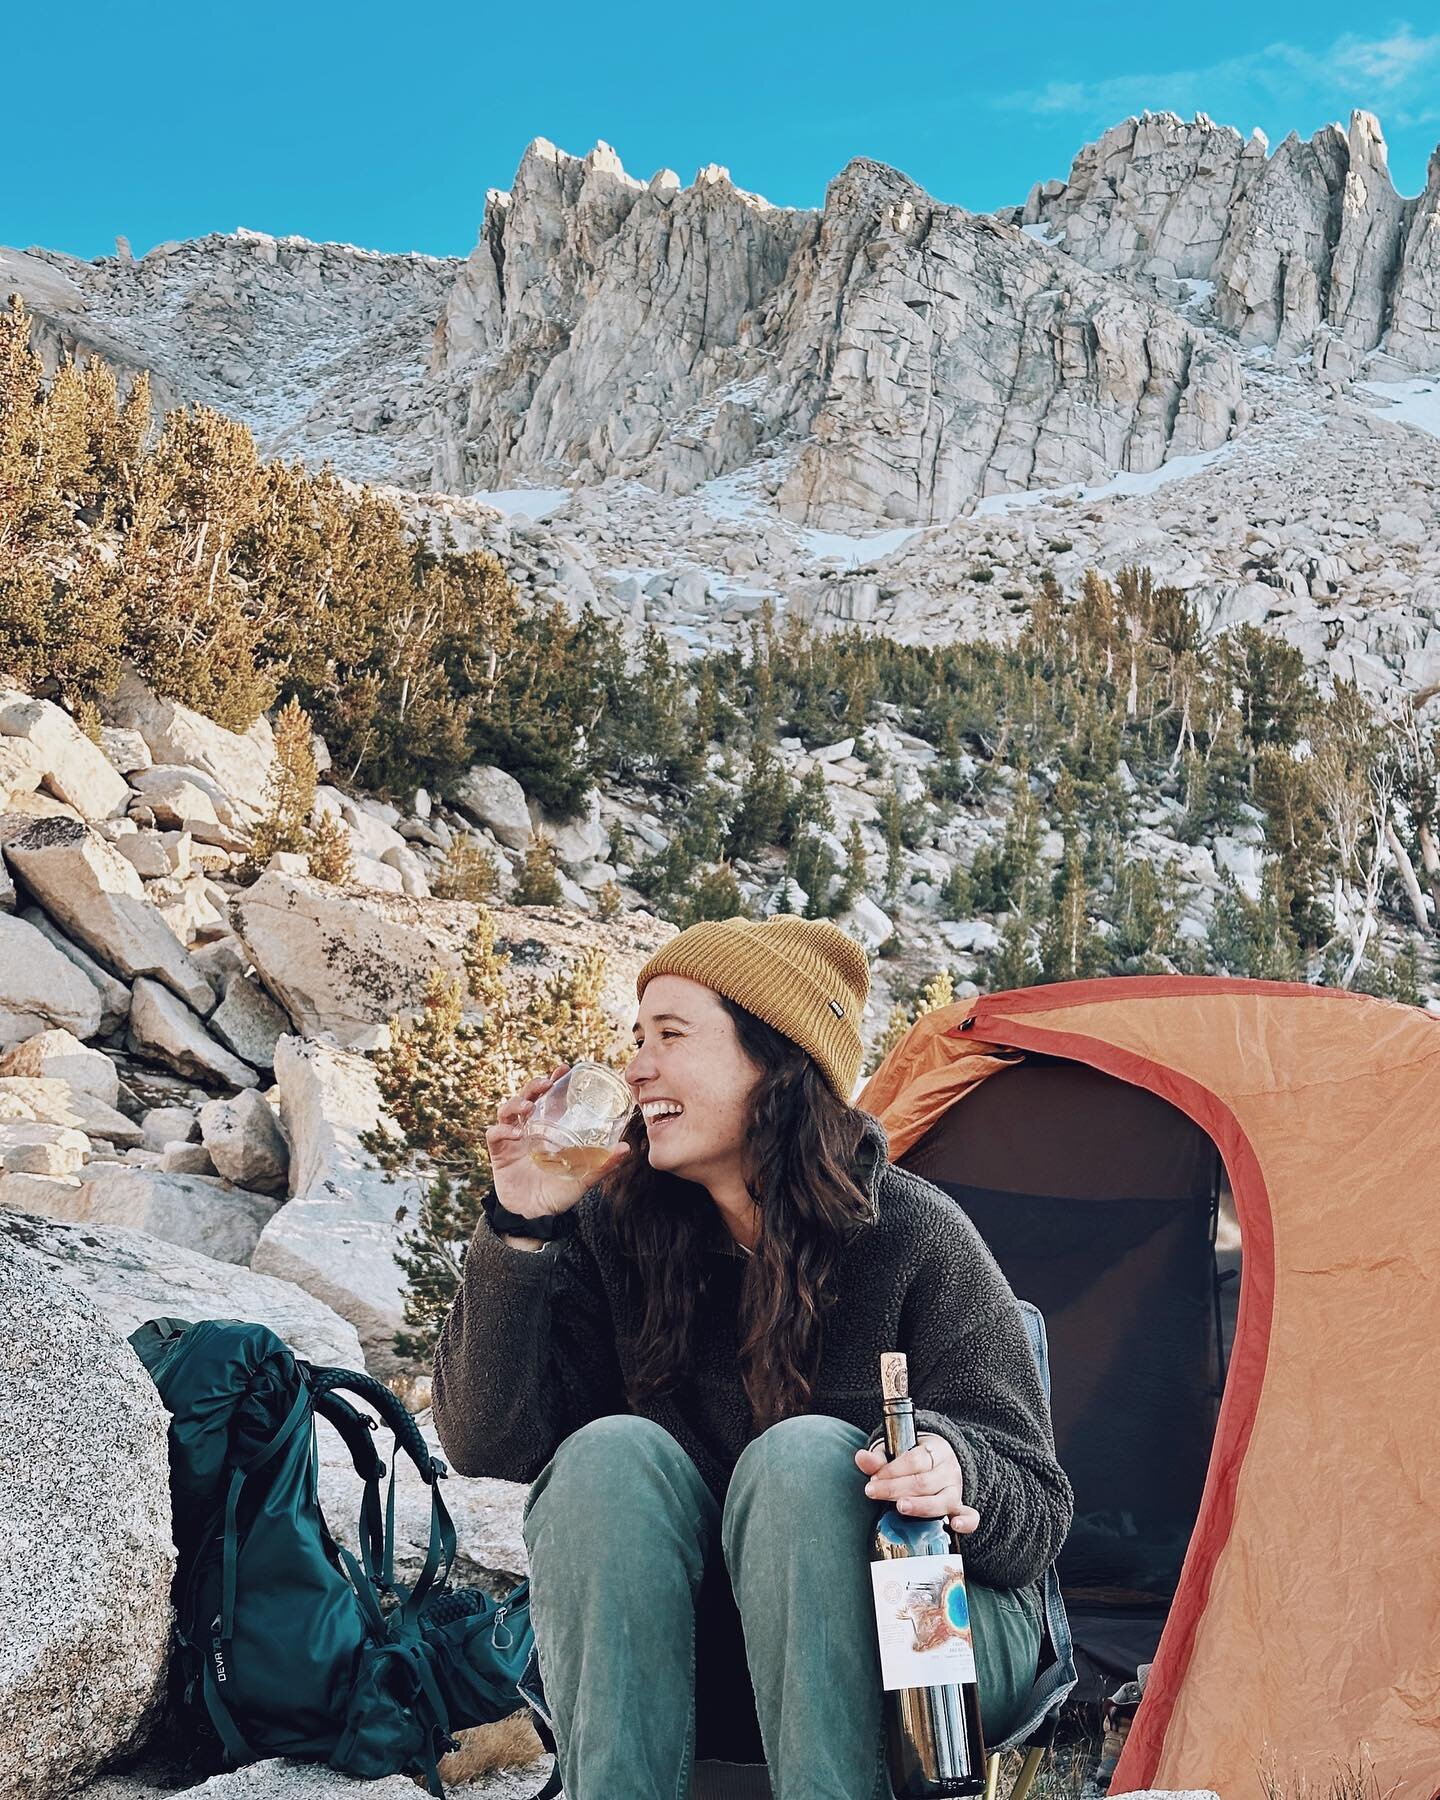 Wild &gt; Mild 🏕️
⠀⠀⠀⠀⠀⠀⠀⠀⠀
The Wilders Club is meant to inspire more wild moments in your life &hellip;
⠀⠀⠀⠀⠀⠀⠀⠀⠀
We can&rsquo;t tell you how happy it makes us when our wine joins you on your adventures!
⠀⠀⠀⠀⠀⠀⠀⠀⠀
📸 @alihuertaaa x @jerbus_mcgurbus